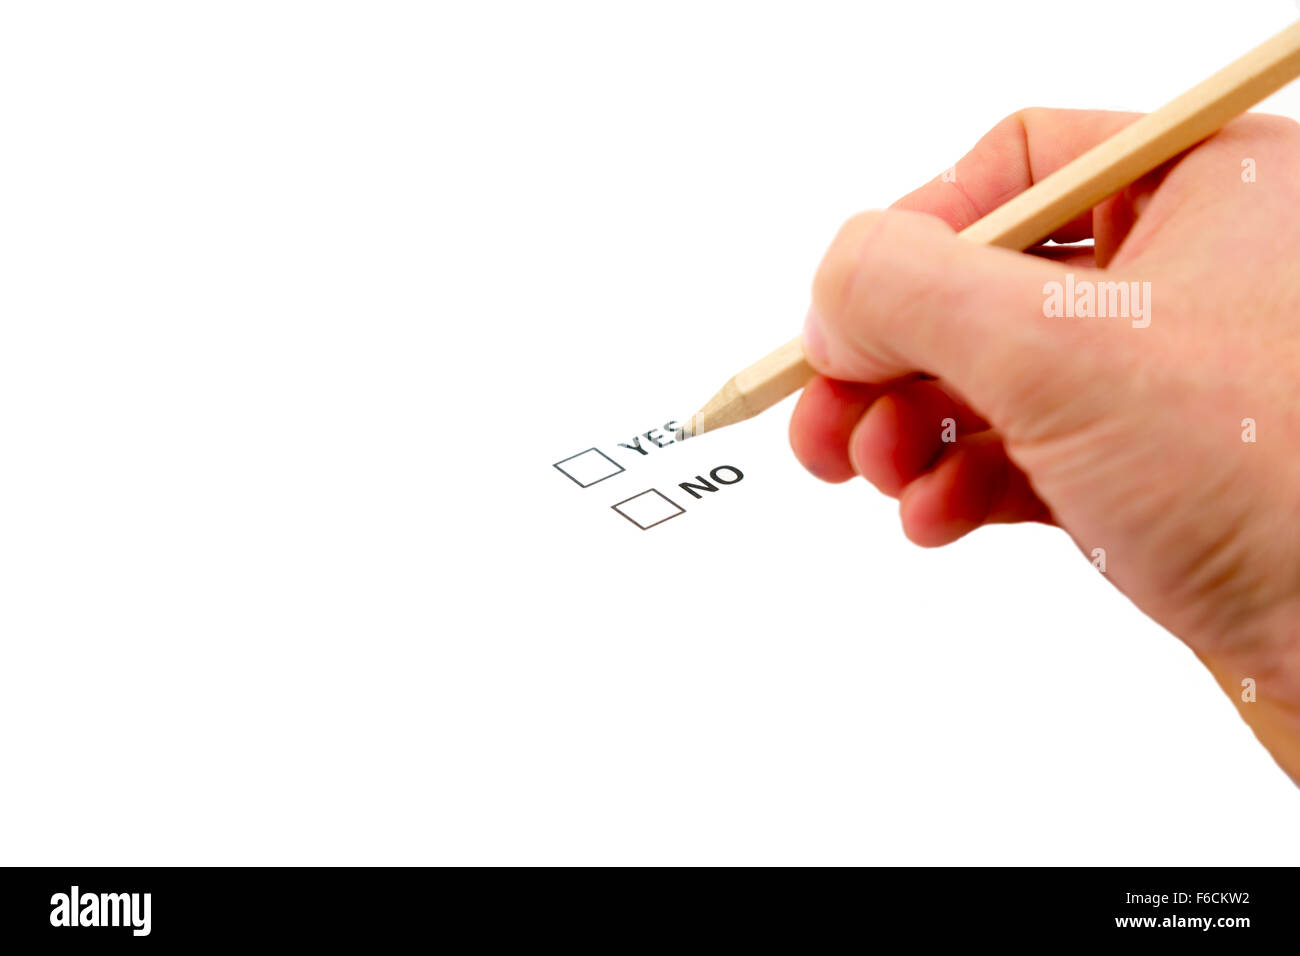 yes/no referendum vote ballot paper, with a person holding a pencil deciding which way to vote Stock Photo